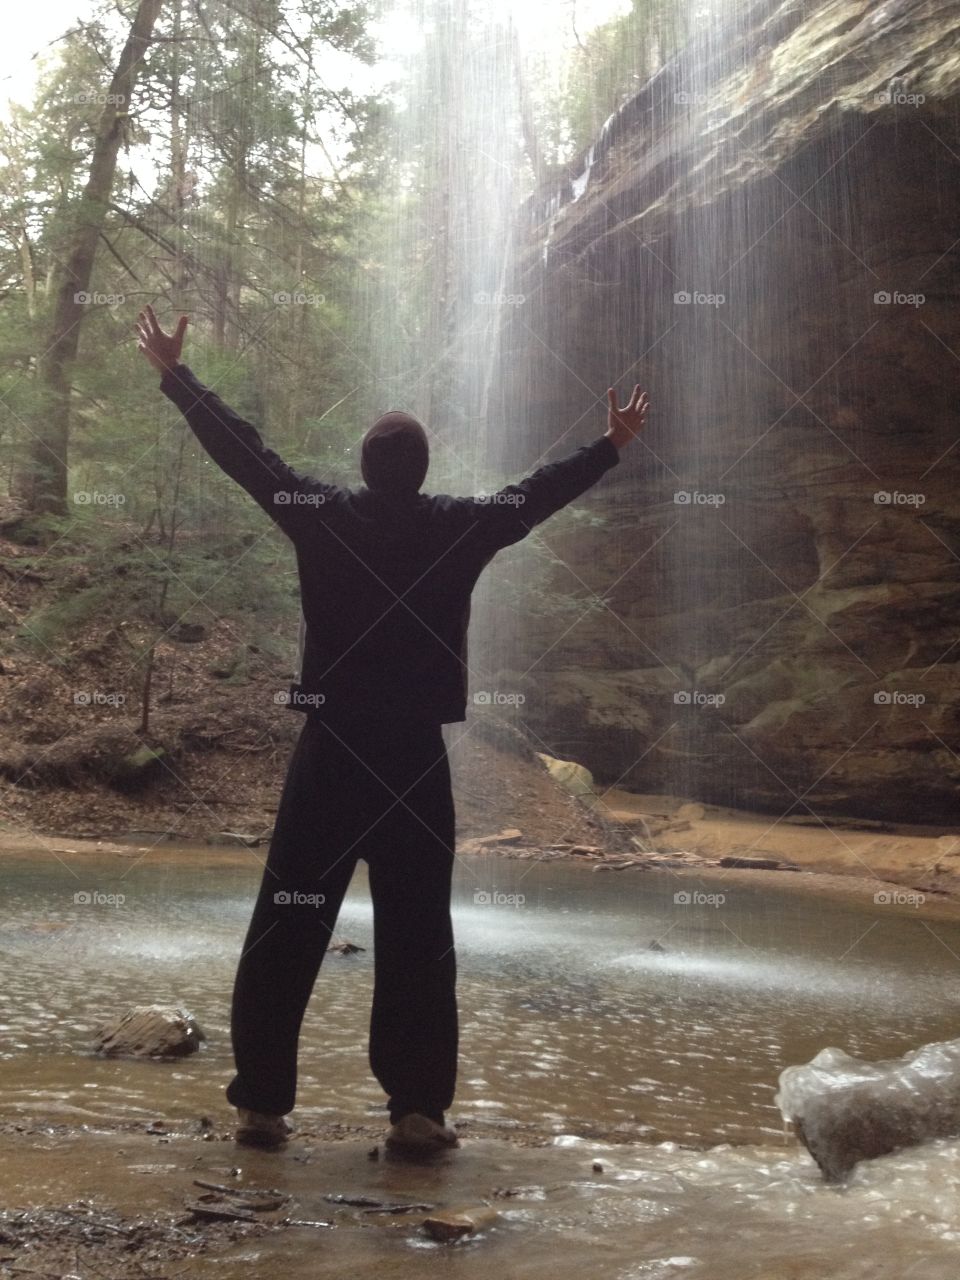 Taking in the water fall in Ohio's Hocking Hills